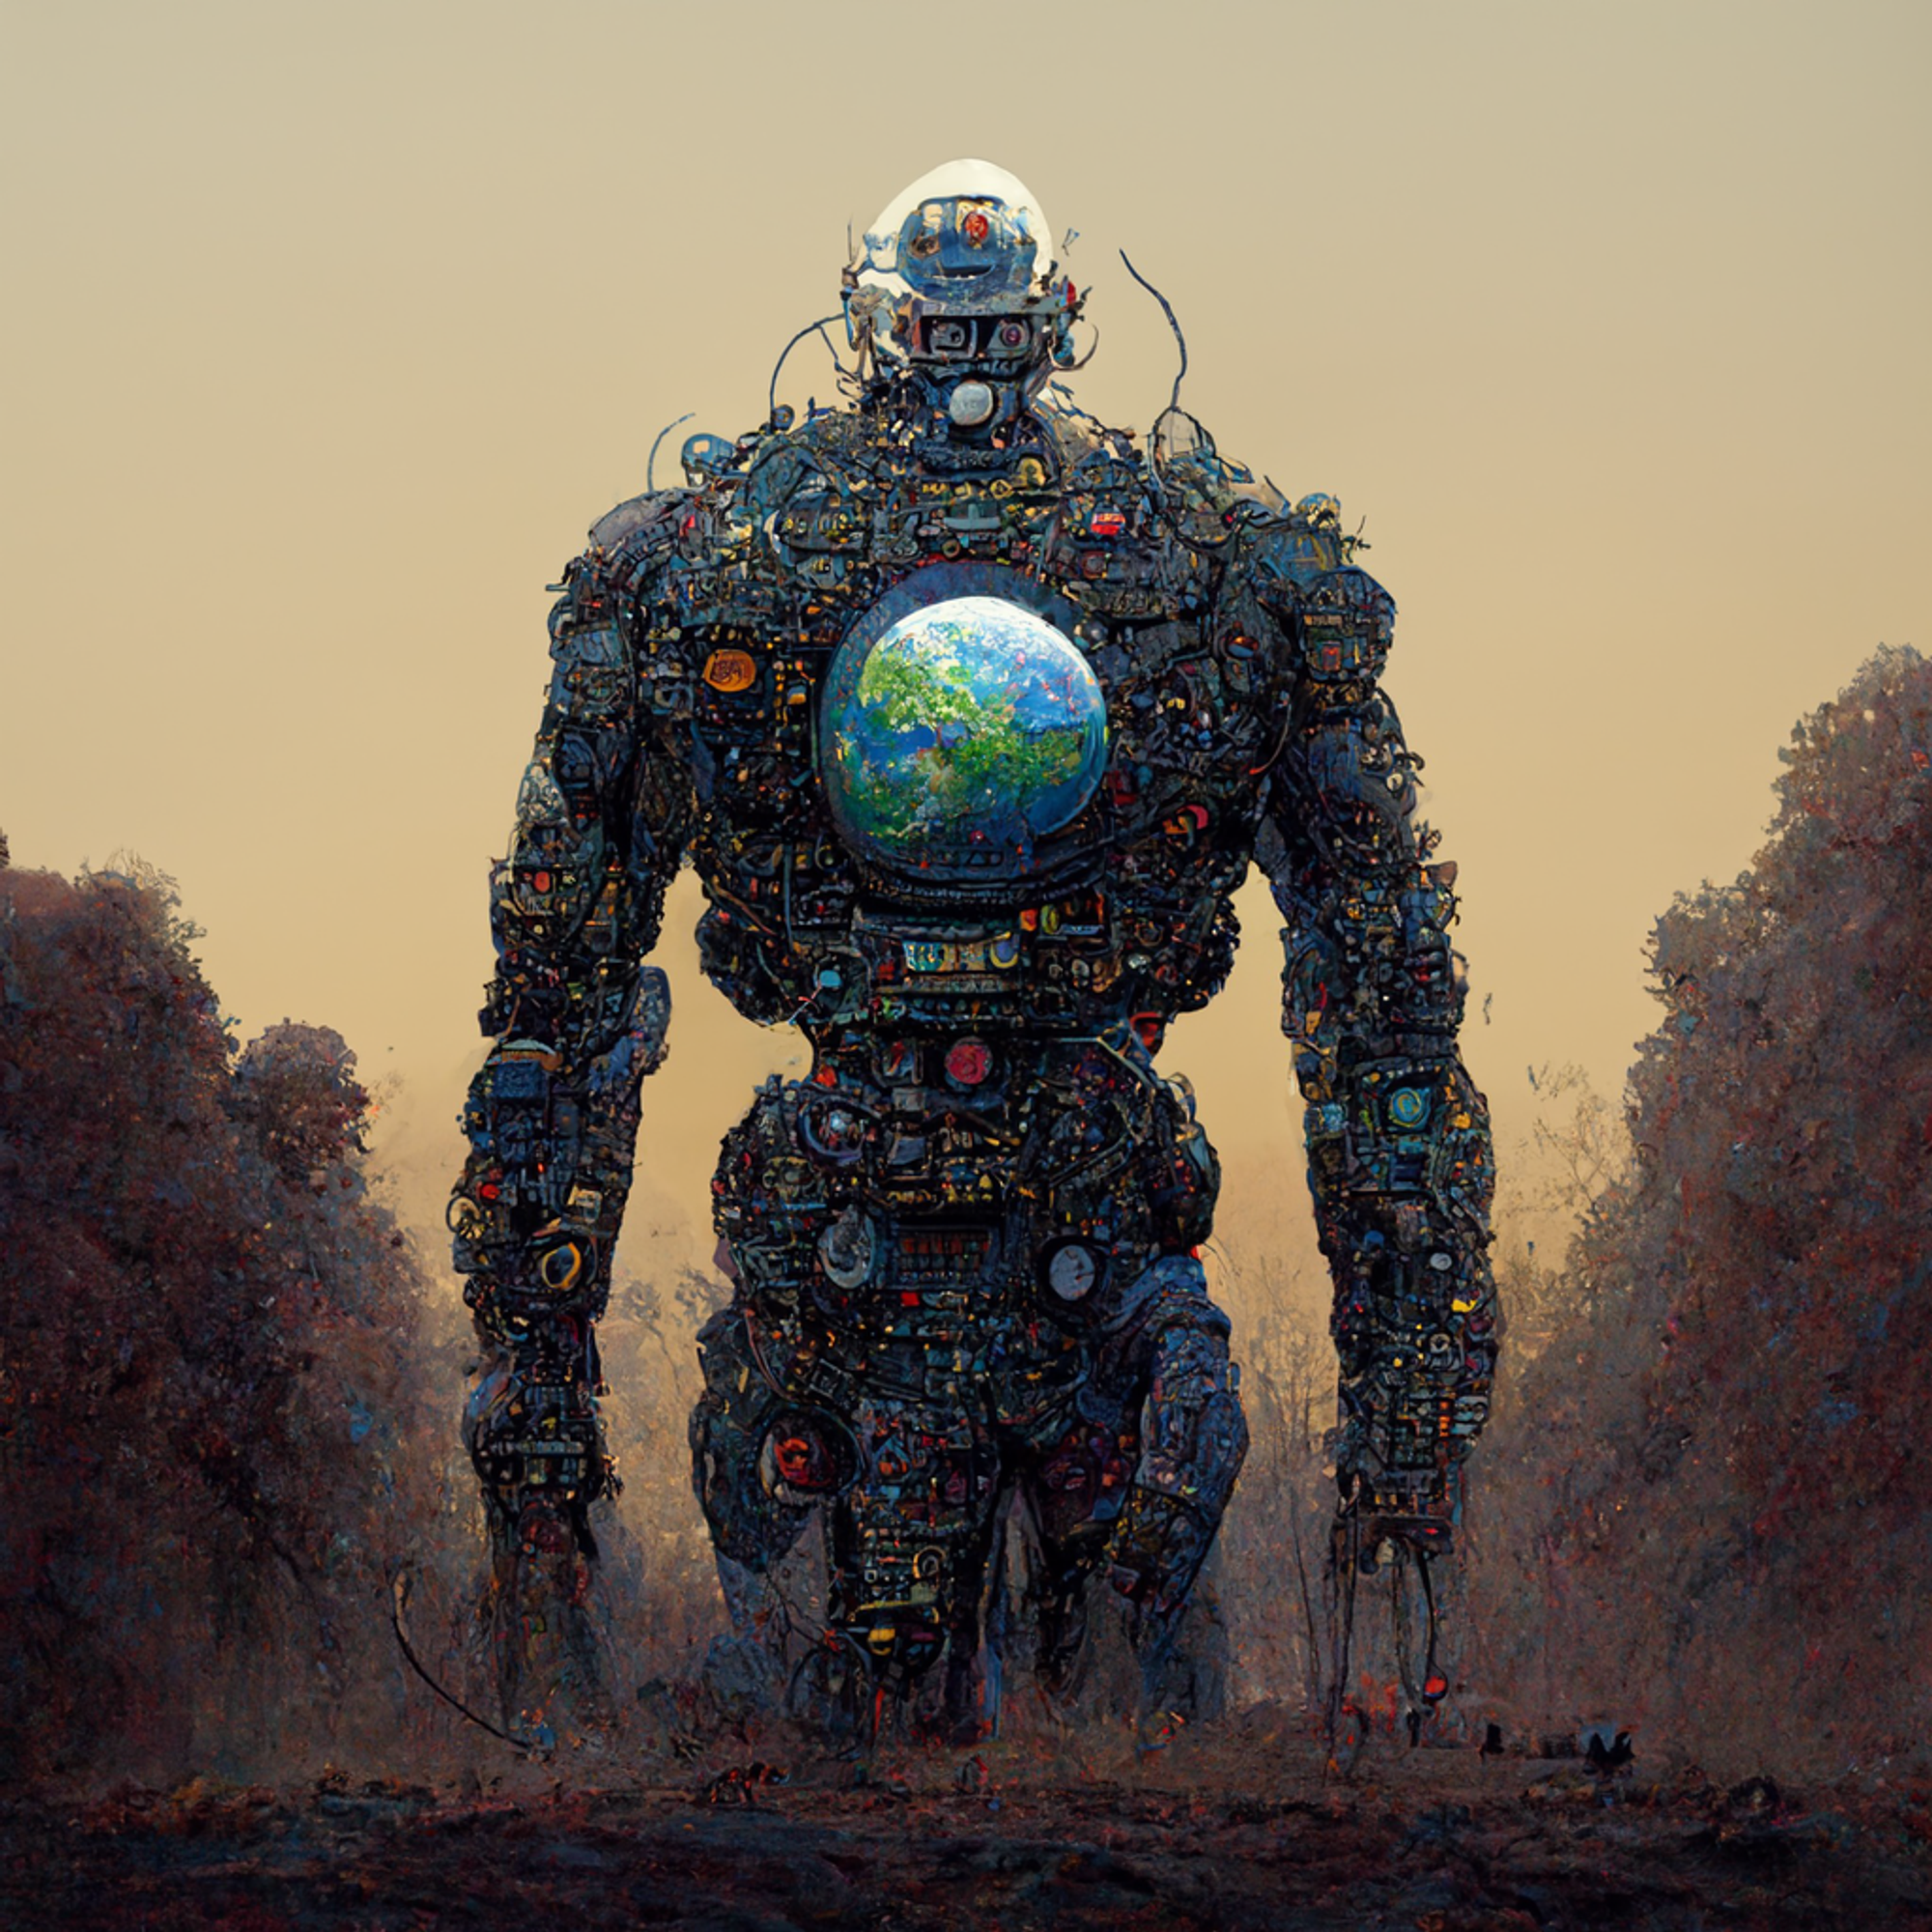 /imagine a highly detailed illustration of a giant humanoid robot with circuit skin eating planet earth